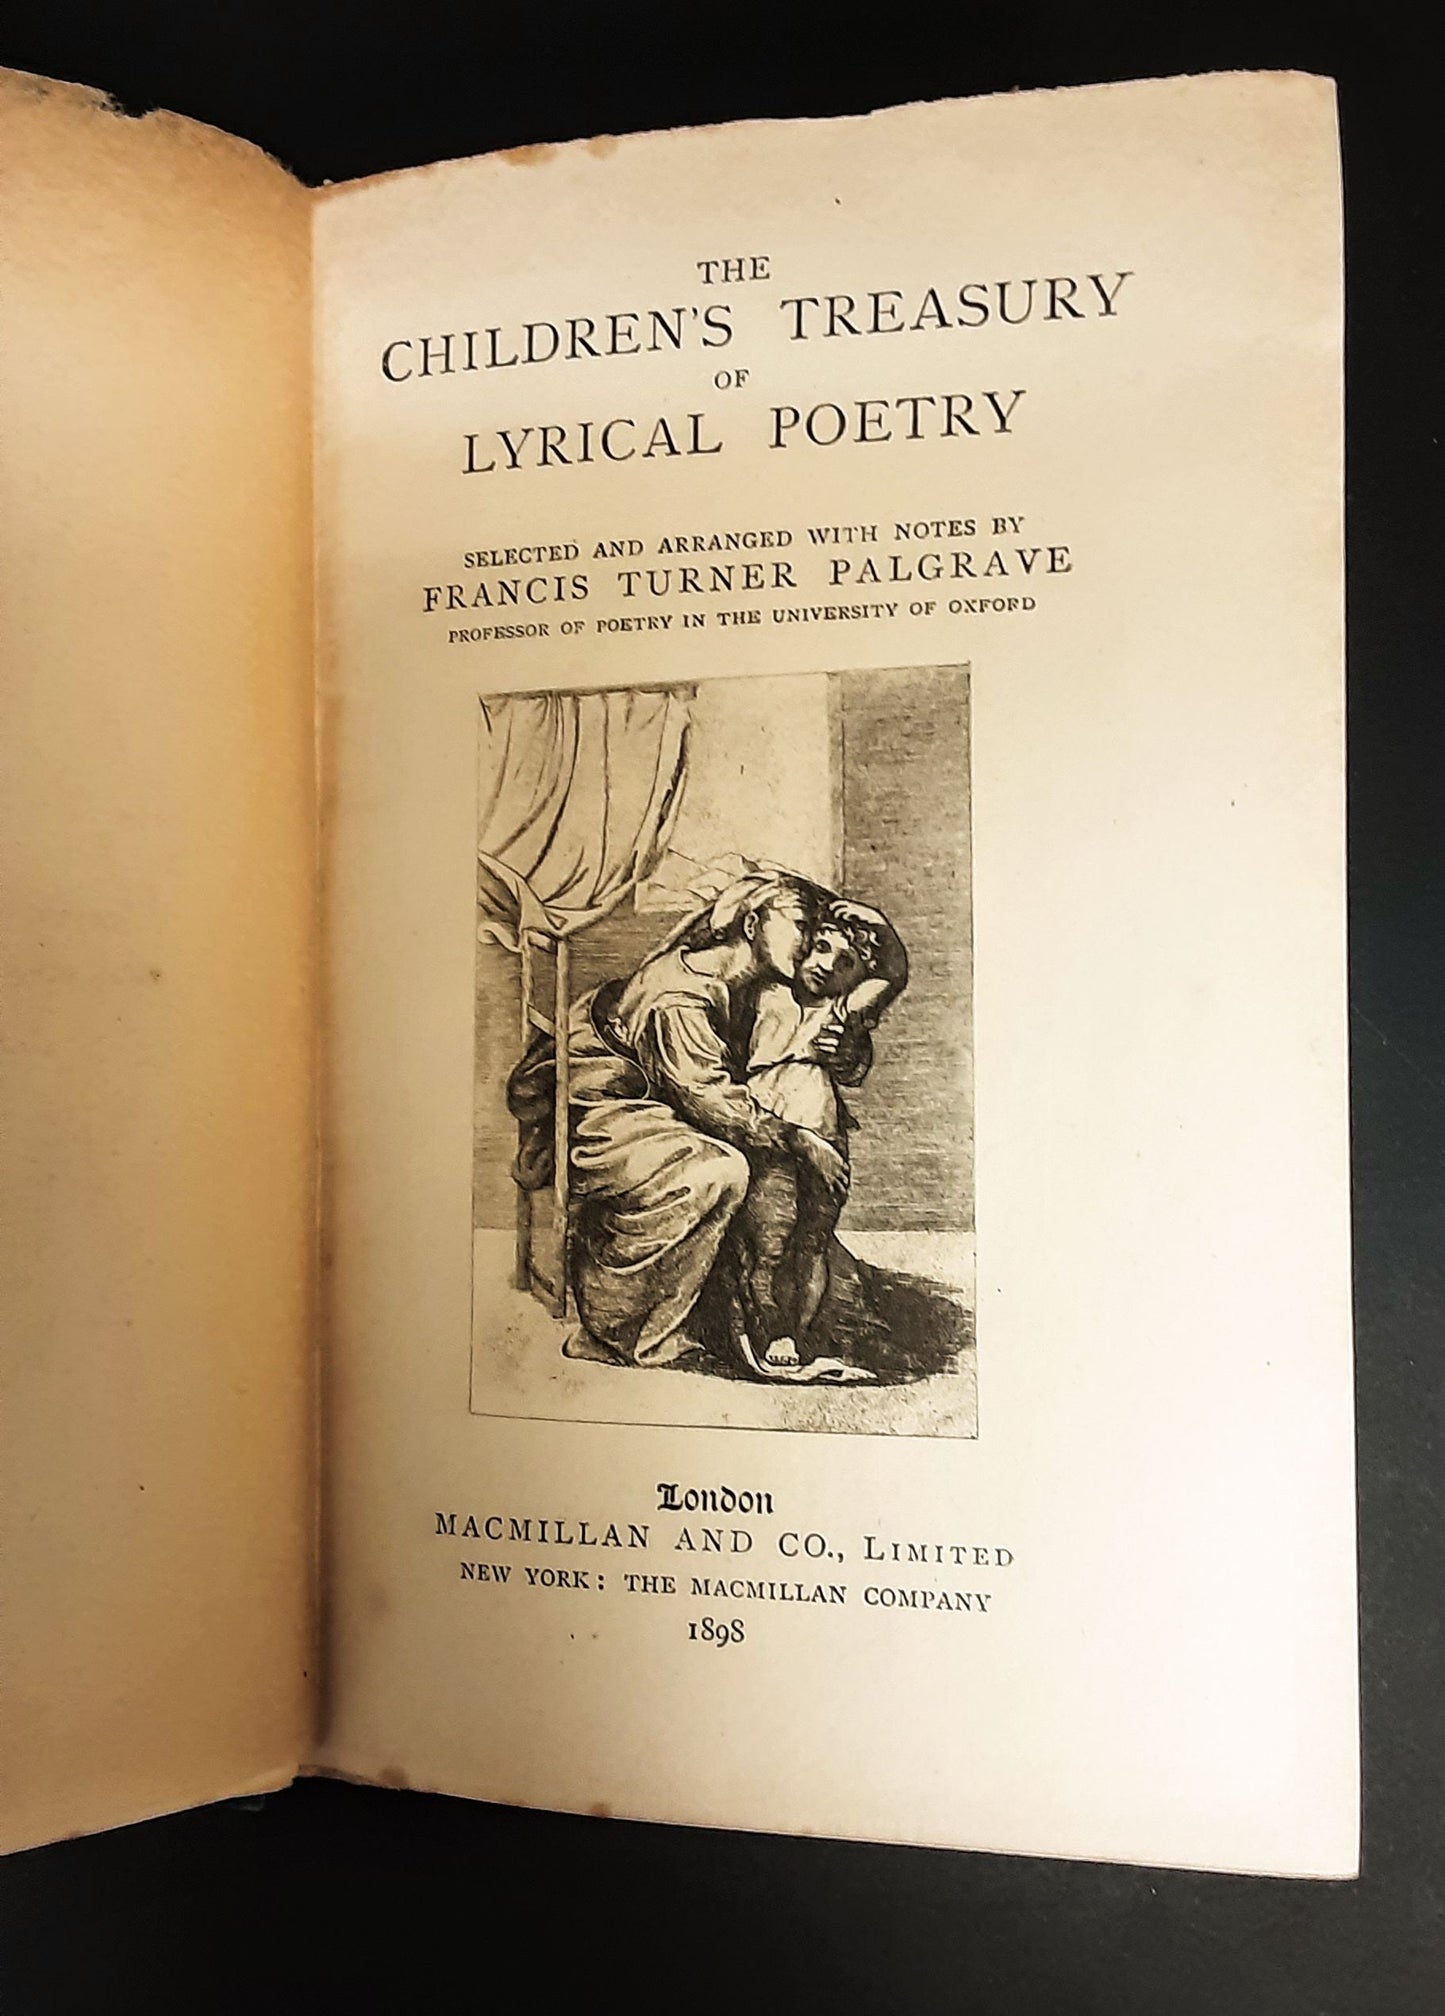 The Children's Treasury of Lyrical Poetry by Franics Turner Palgrave, Macmillan & Co 1898